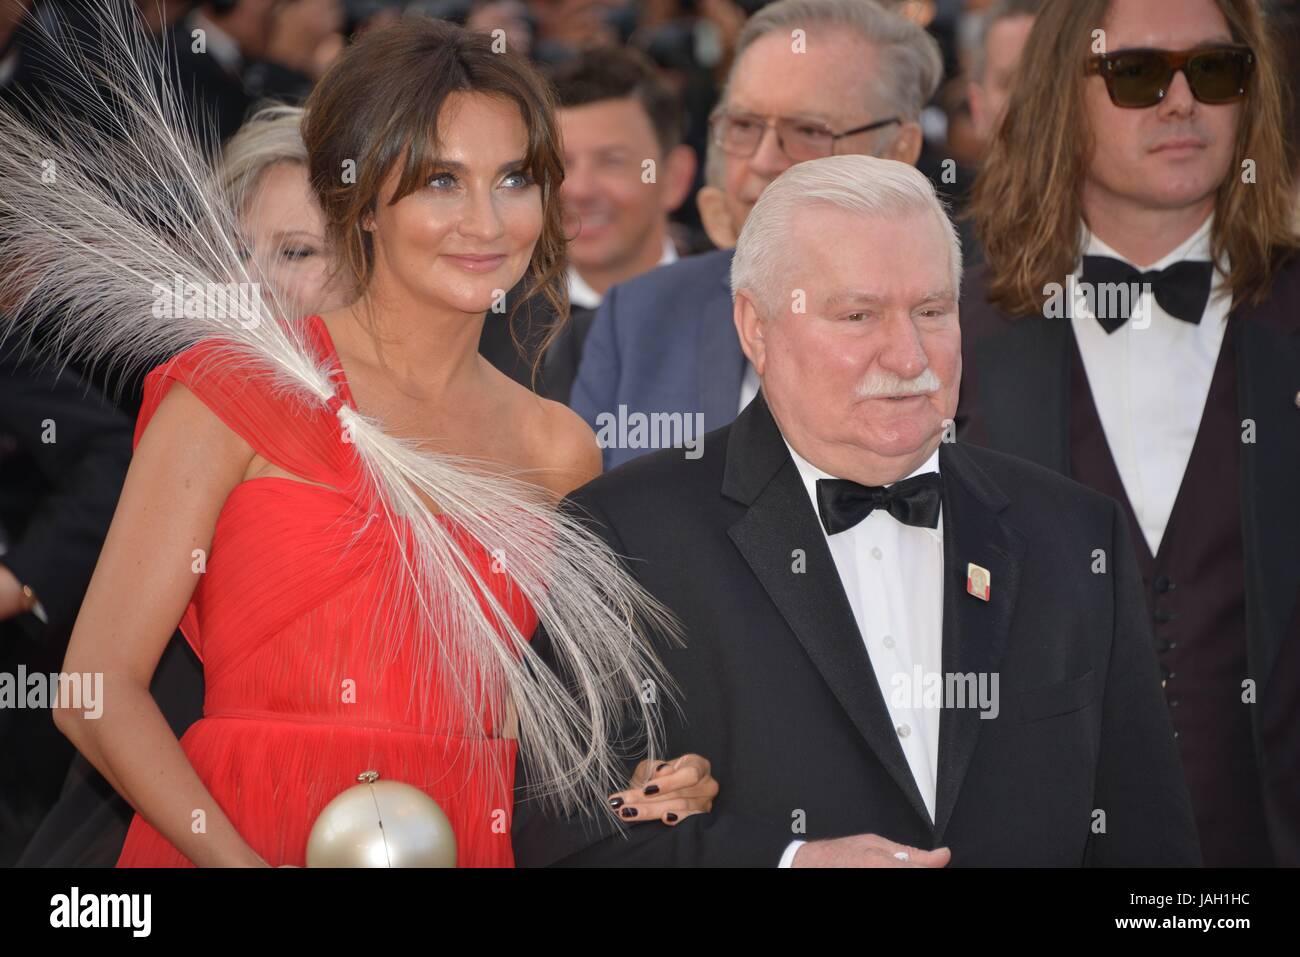 Lech Walesa, former Polish President of the Republic  Arriving on the red carpet for the film 'The Meyerowitz Stories'  70th Cannes Film Festival  May 21, 2017 Photo Jacky Godard Stock Photo